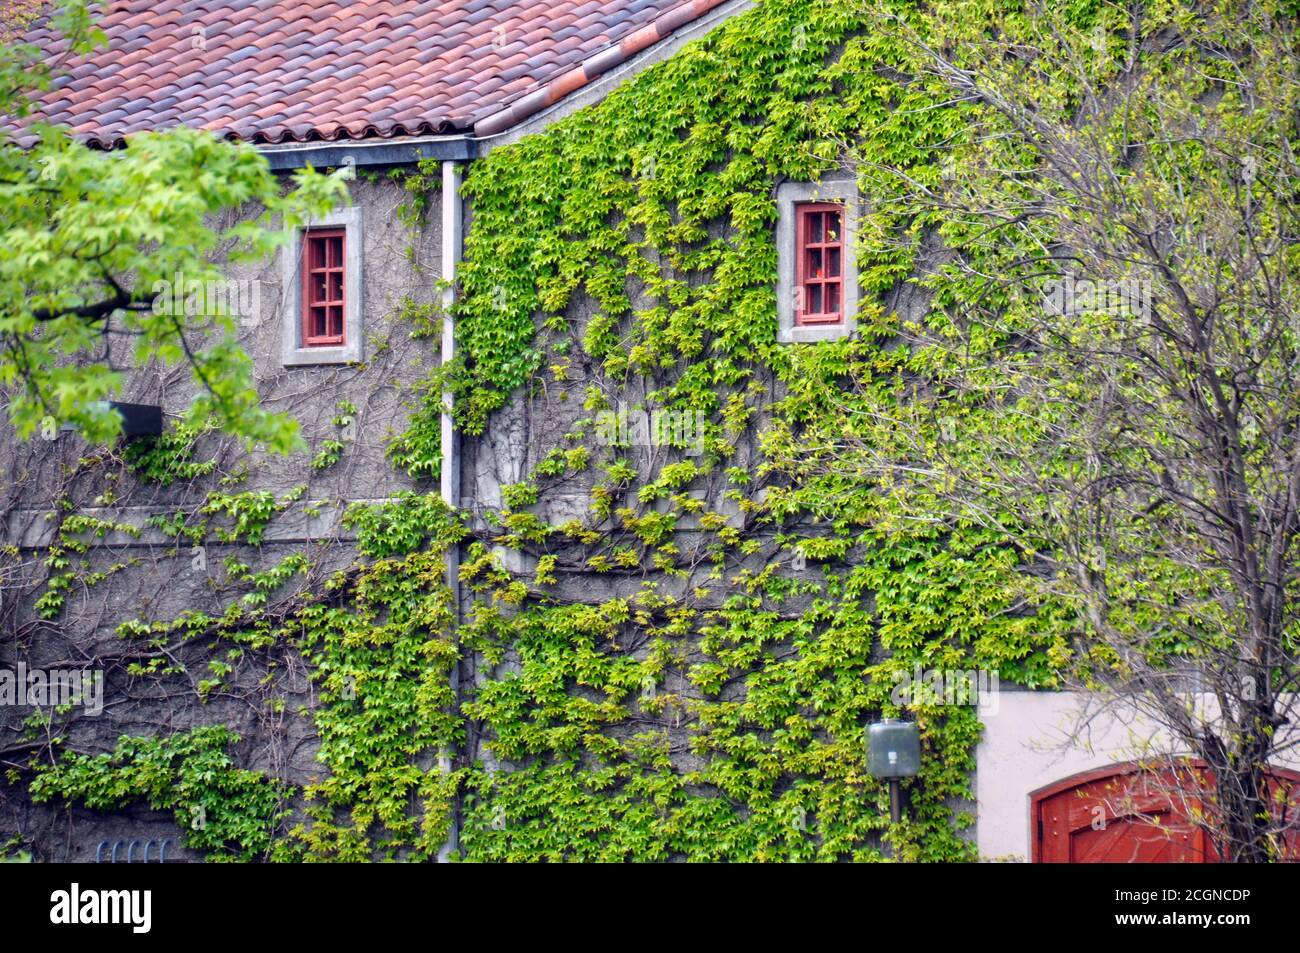 Green, emerald and lime colored climbing vine, growing upon grey slated and red-clay terracotta tiled roof building in the West Coast of America, USA. Stock Photo